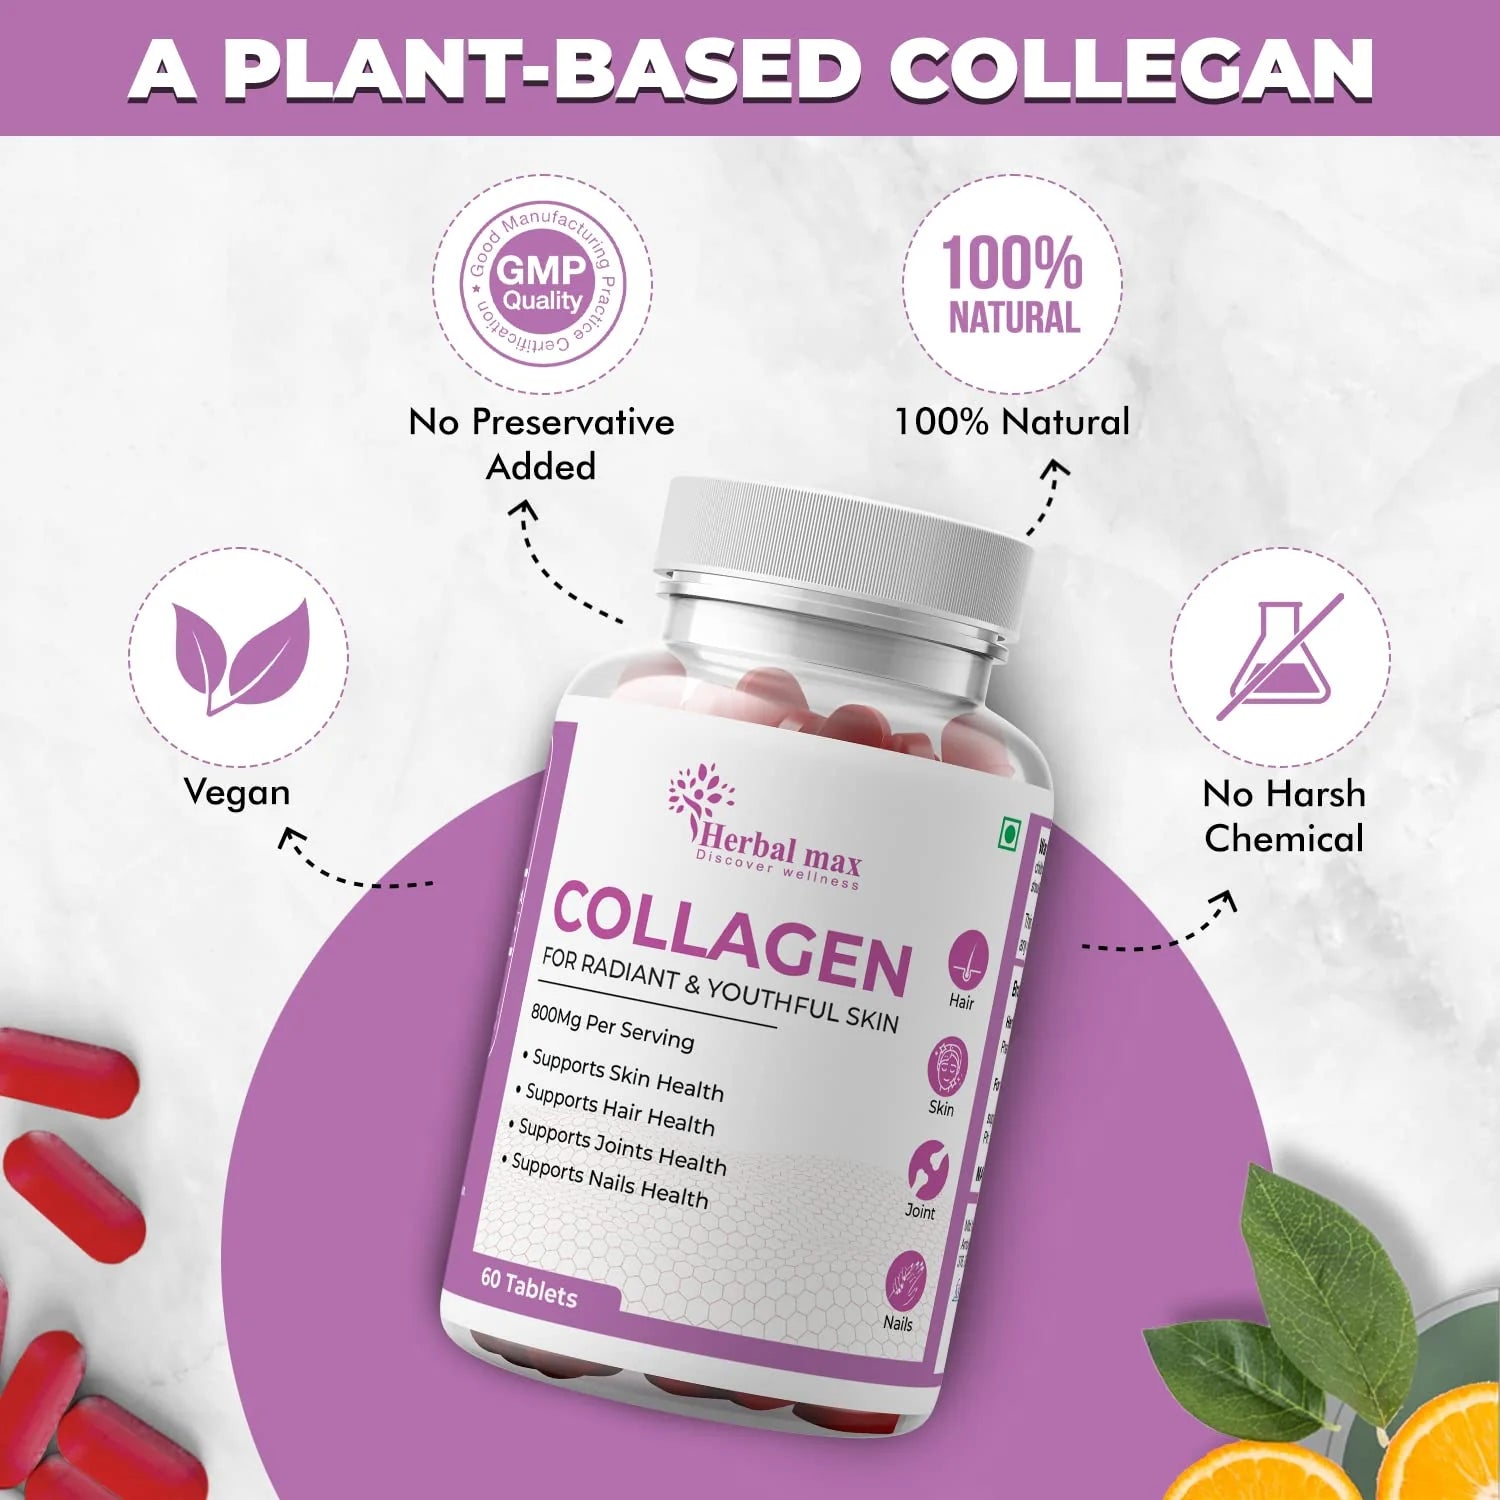 Beauty Collagen and Herbal Max Collagen Combo